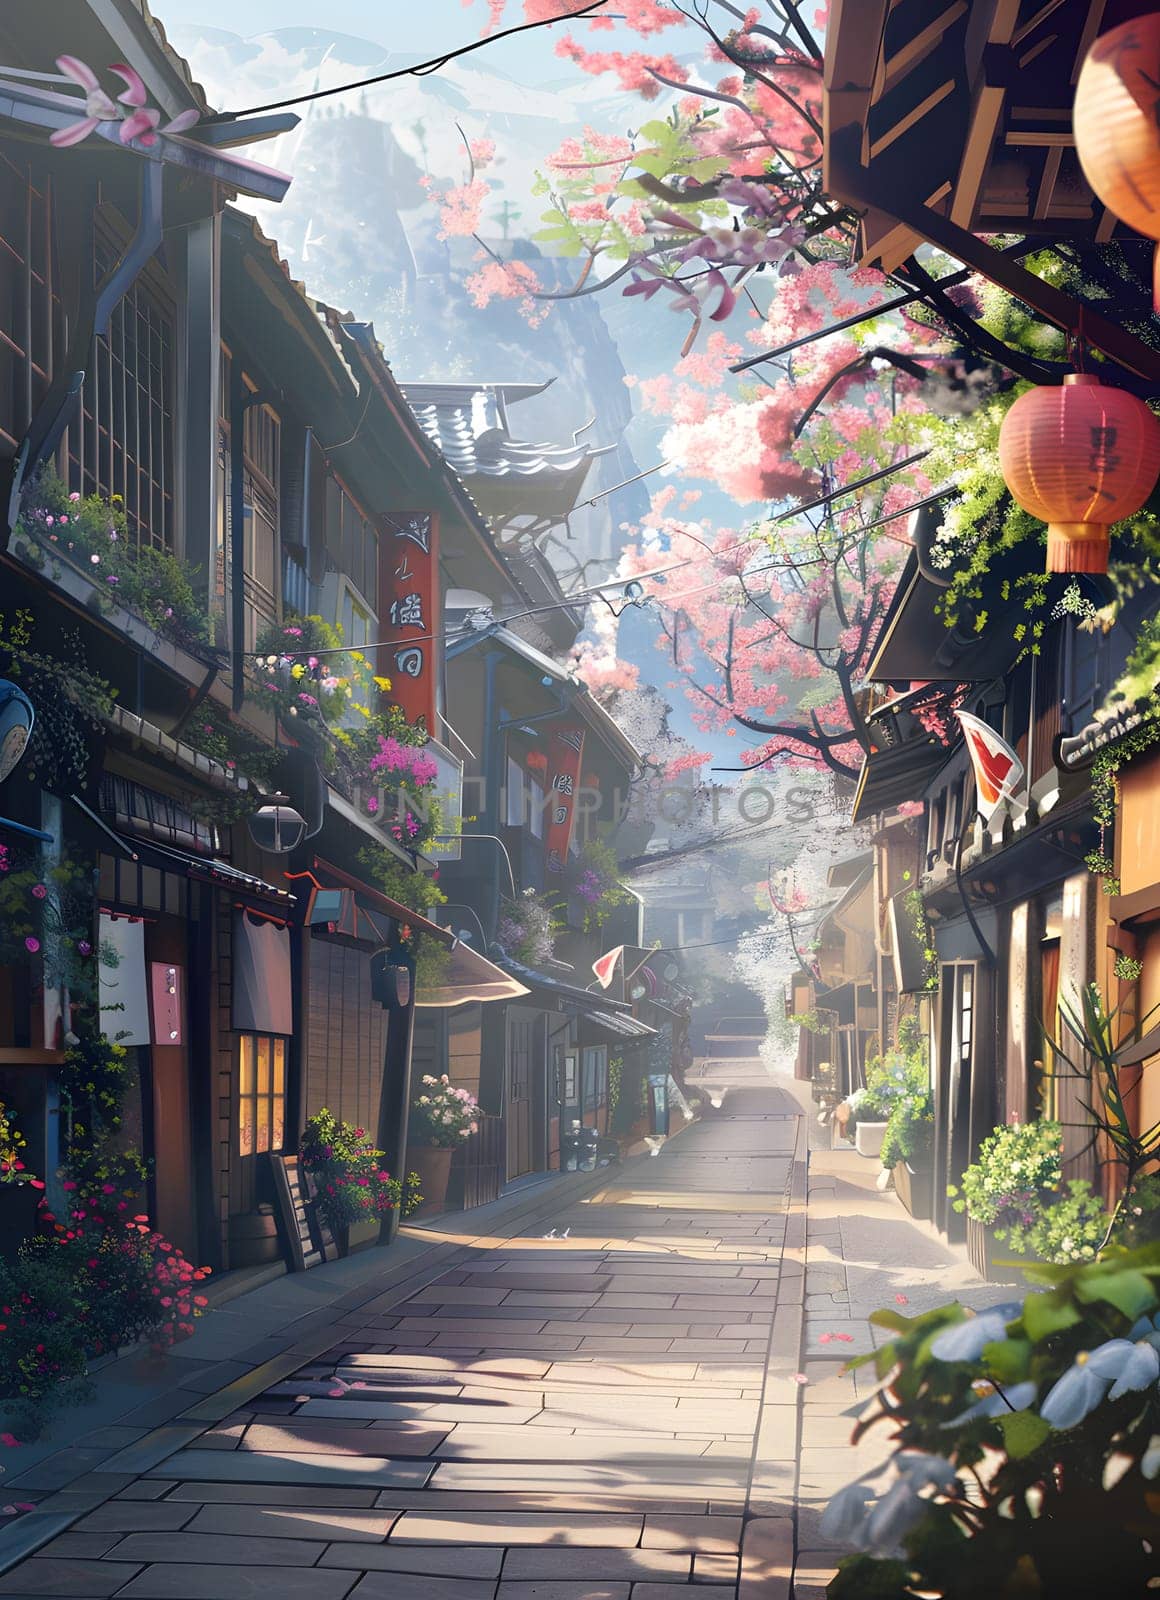 A charming neighbourhood with buildings and flowers lining a narrow street, leading towards a majestic mountain in the background under the beautiful sky